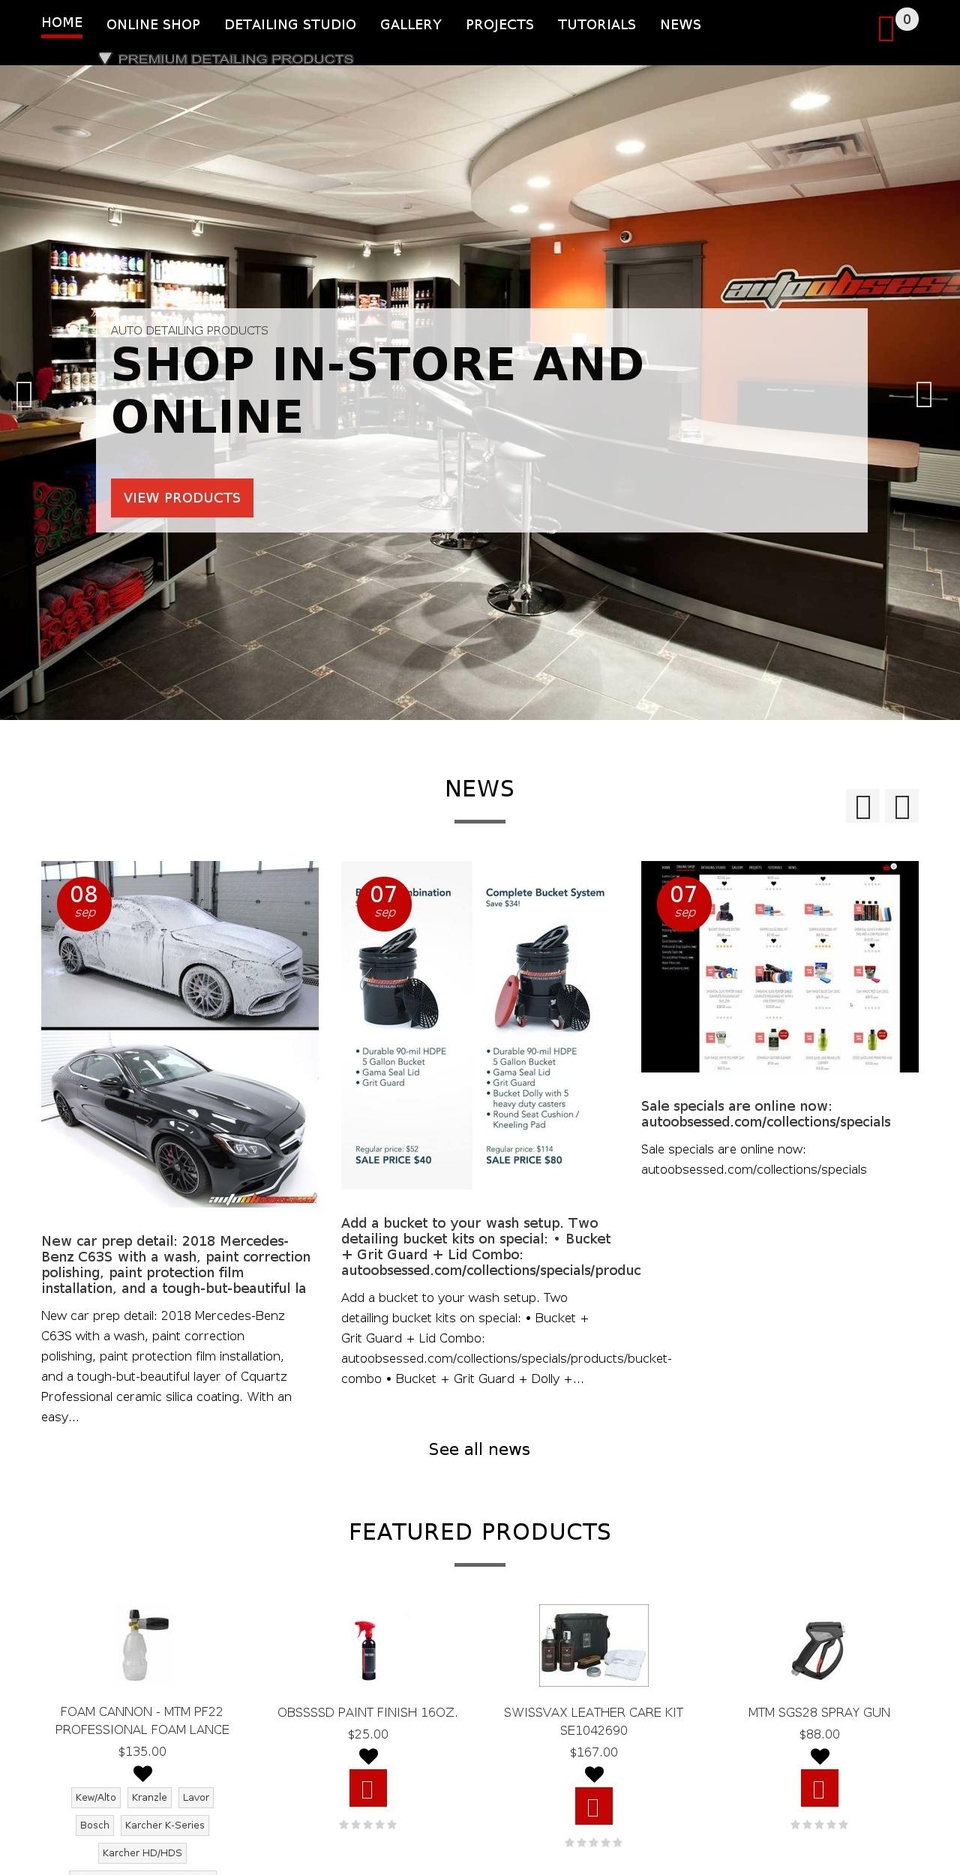 Copy of theme-export-createsimple-inc-myshopify... Shopify theme site example autosobsessed.ca